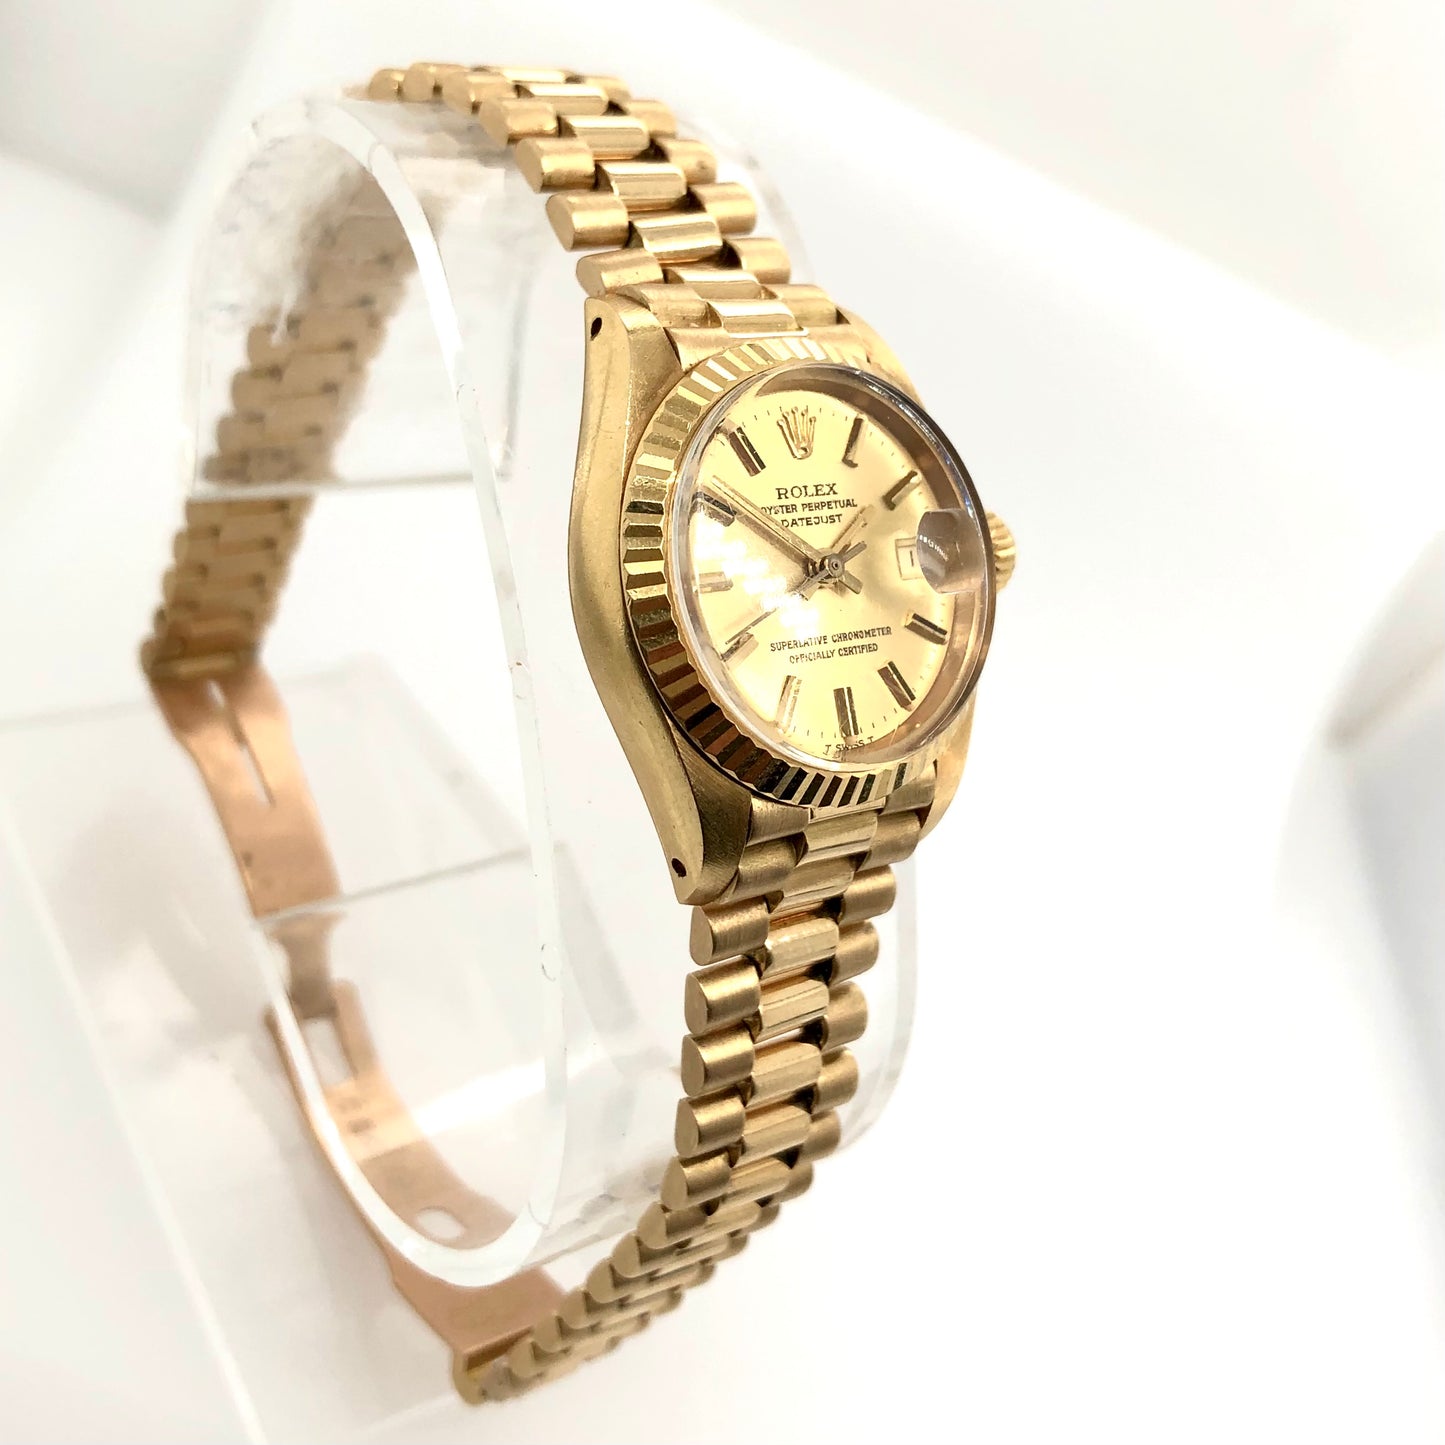 ROLEX OYSTER PERPETUAL DATEJUST Presidential Automtic 26mm 18K Yellow Gold Watch